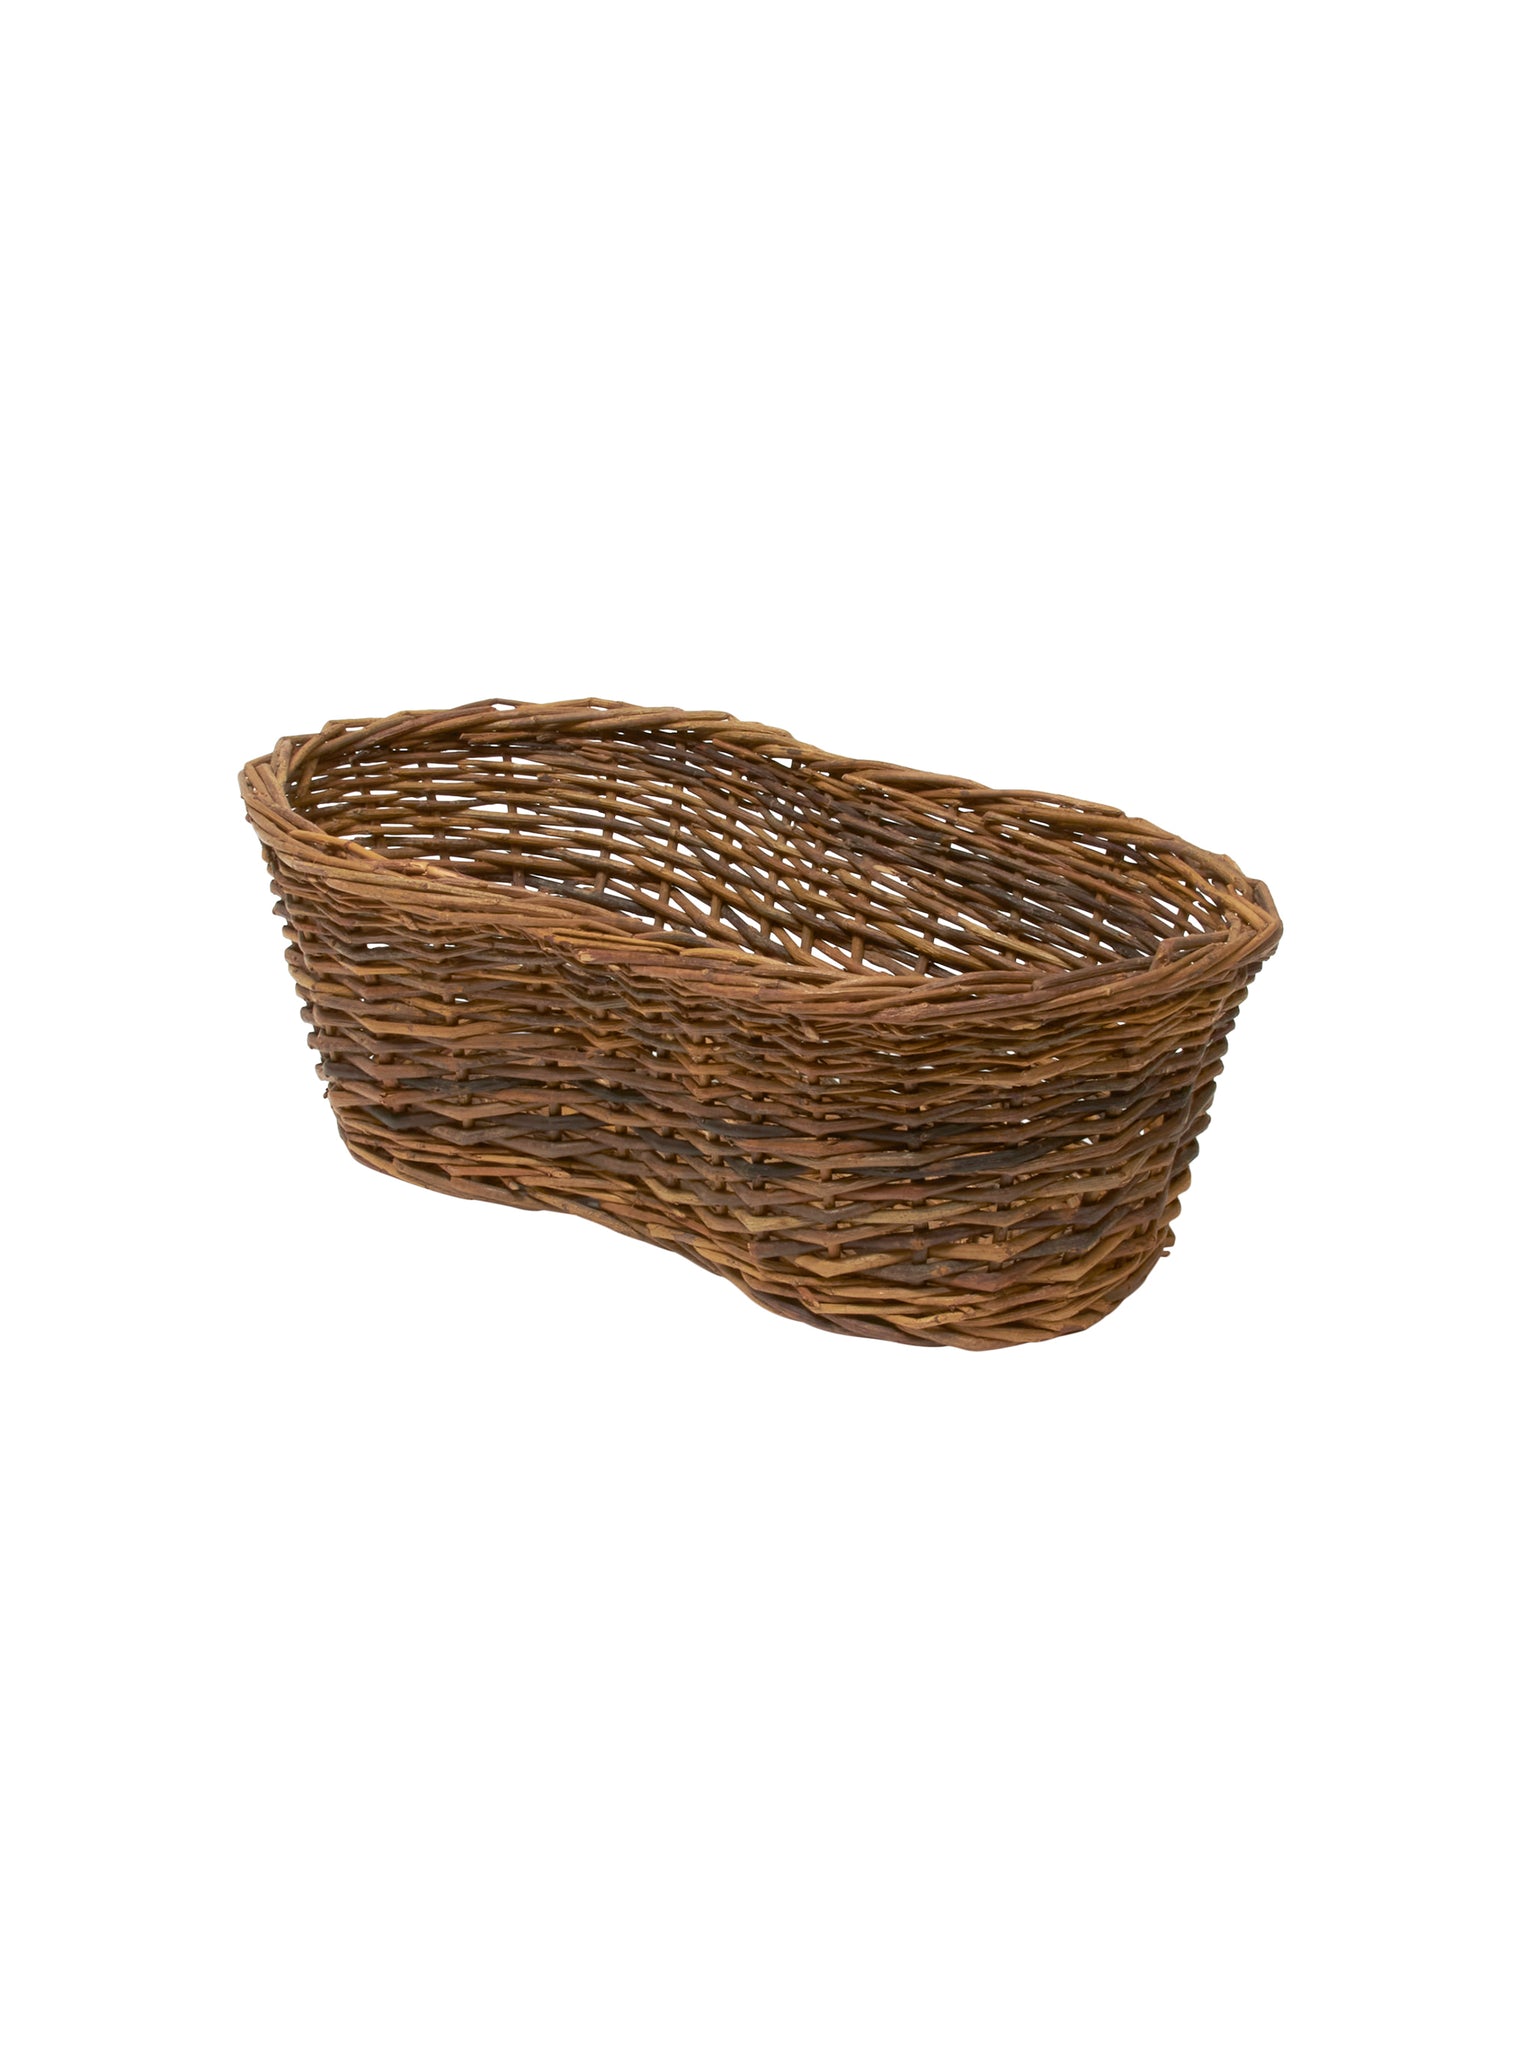 Vintage 1930s French Wicker Bread Proofing Basket Weston Table